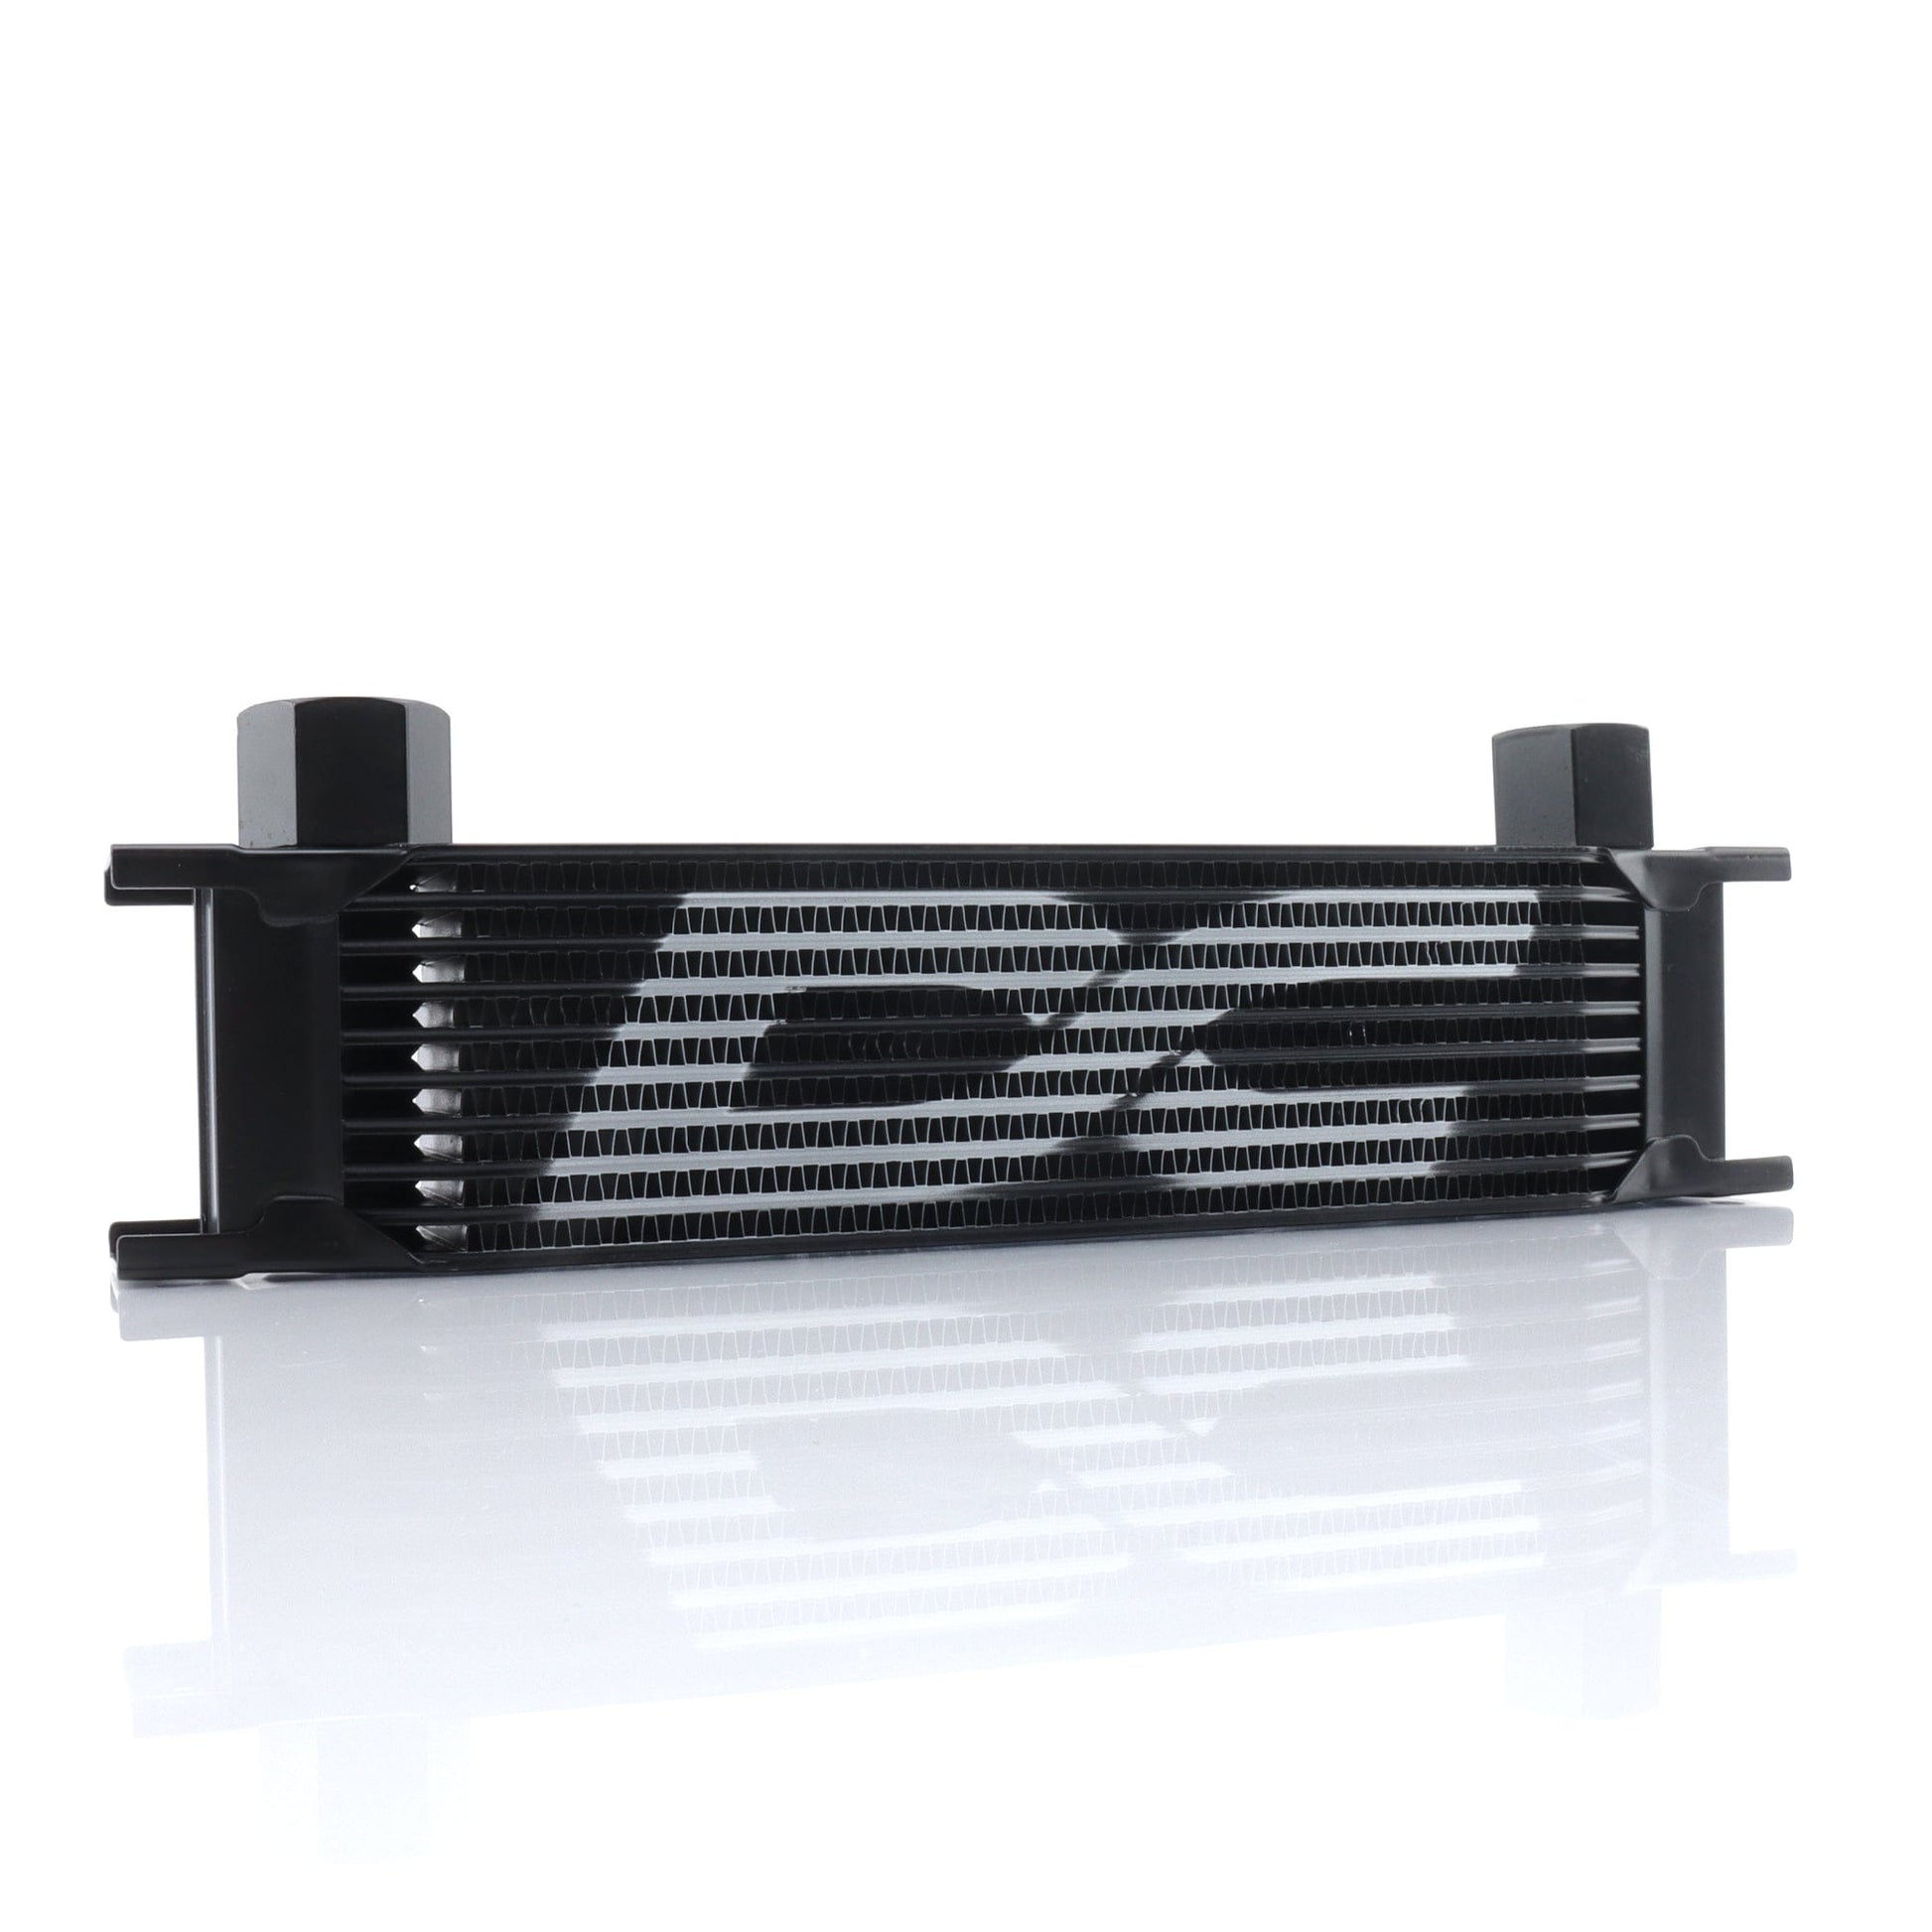 DC Sports Oil Cooler No Fittings DC SPORTS 10 ROW UNIVERSAL OIL COOLER; BLACK